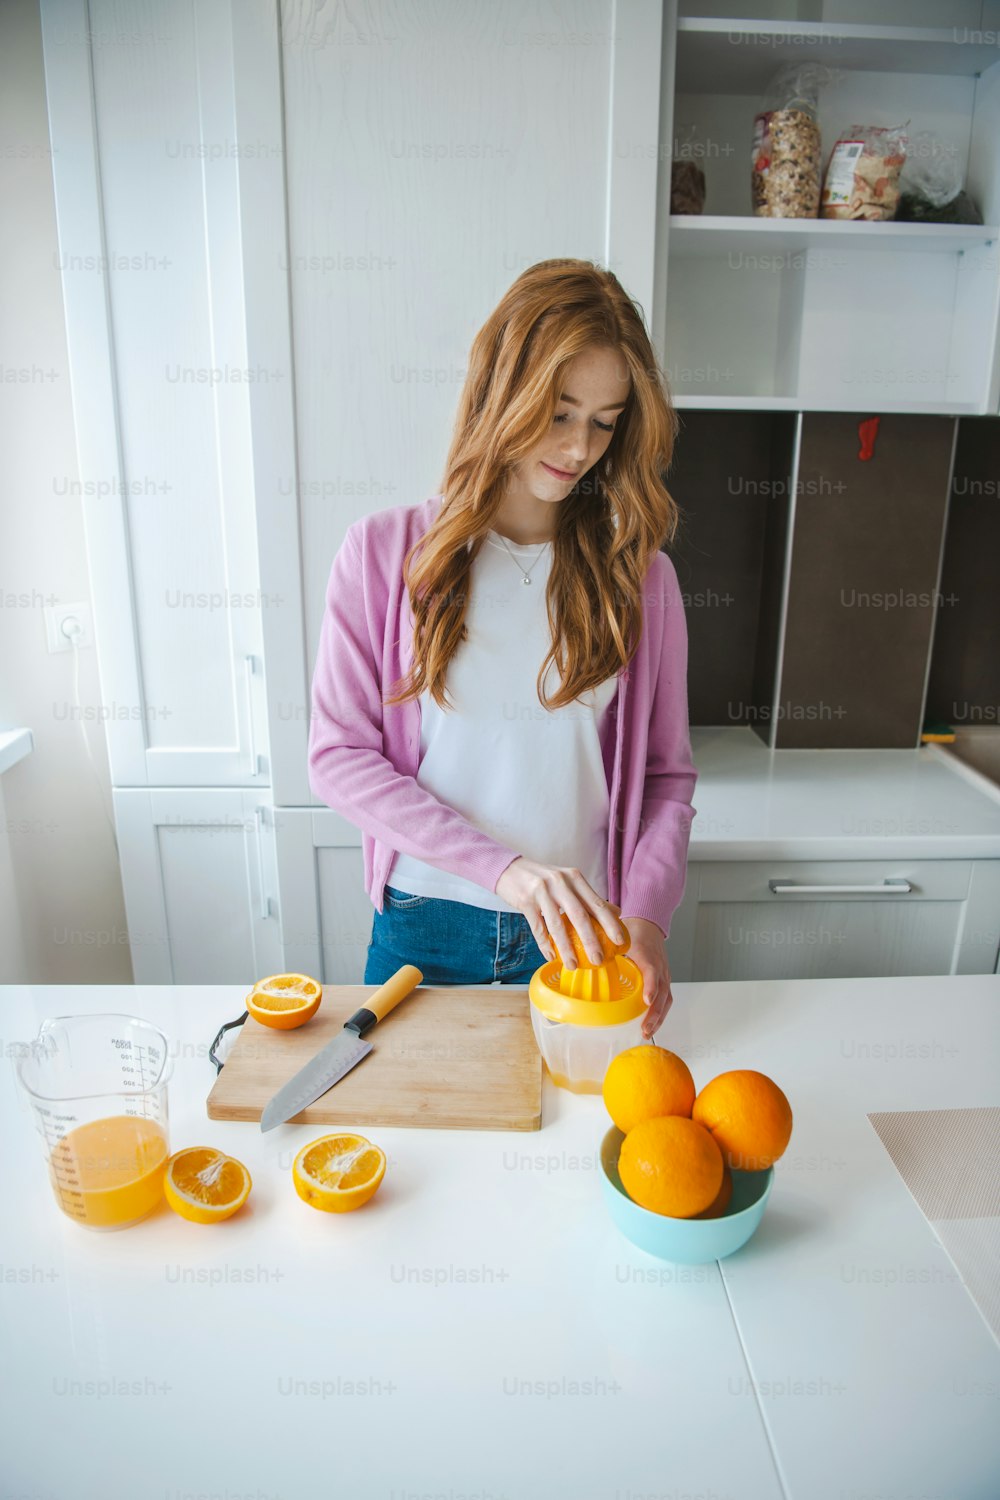 Fruit juice. Woman squeeze fresh juice. Ginger person with freckles working in kitchen.